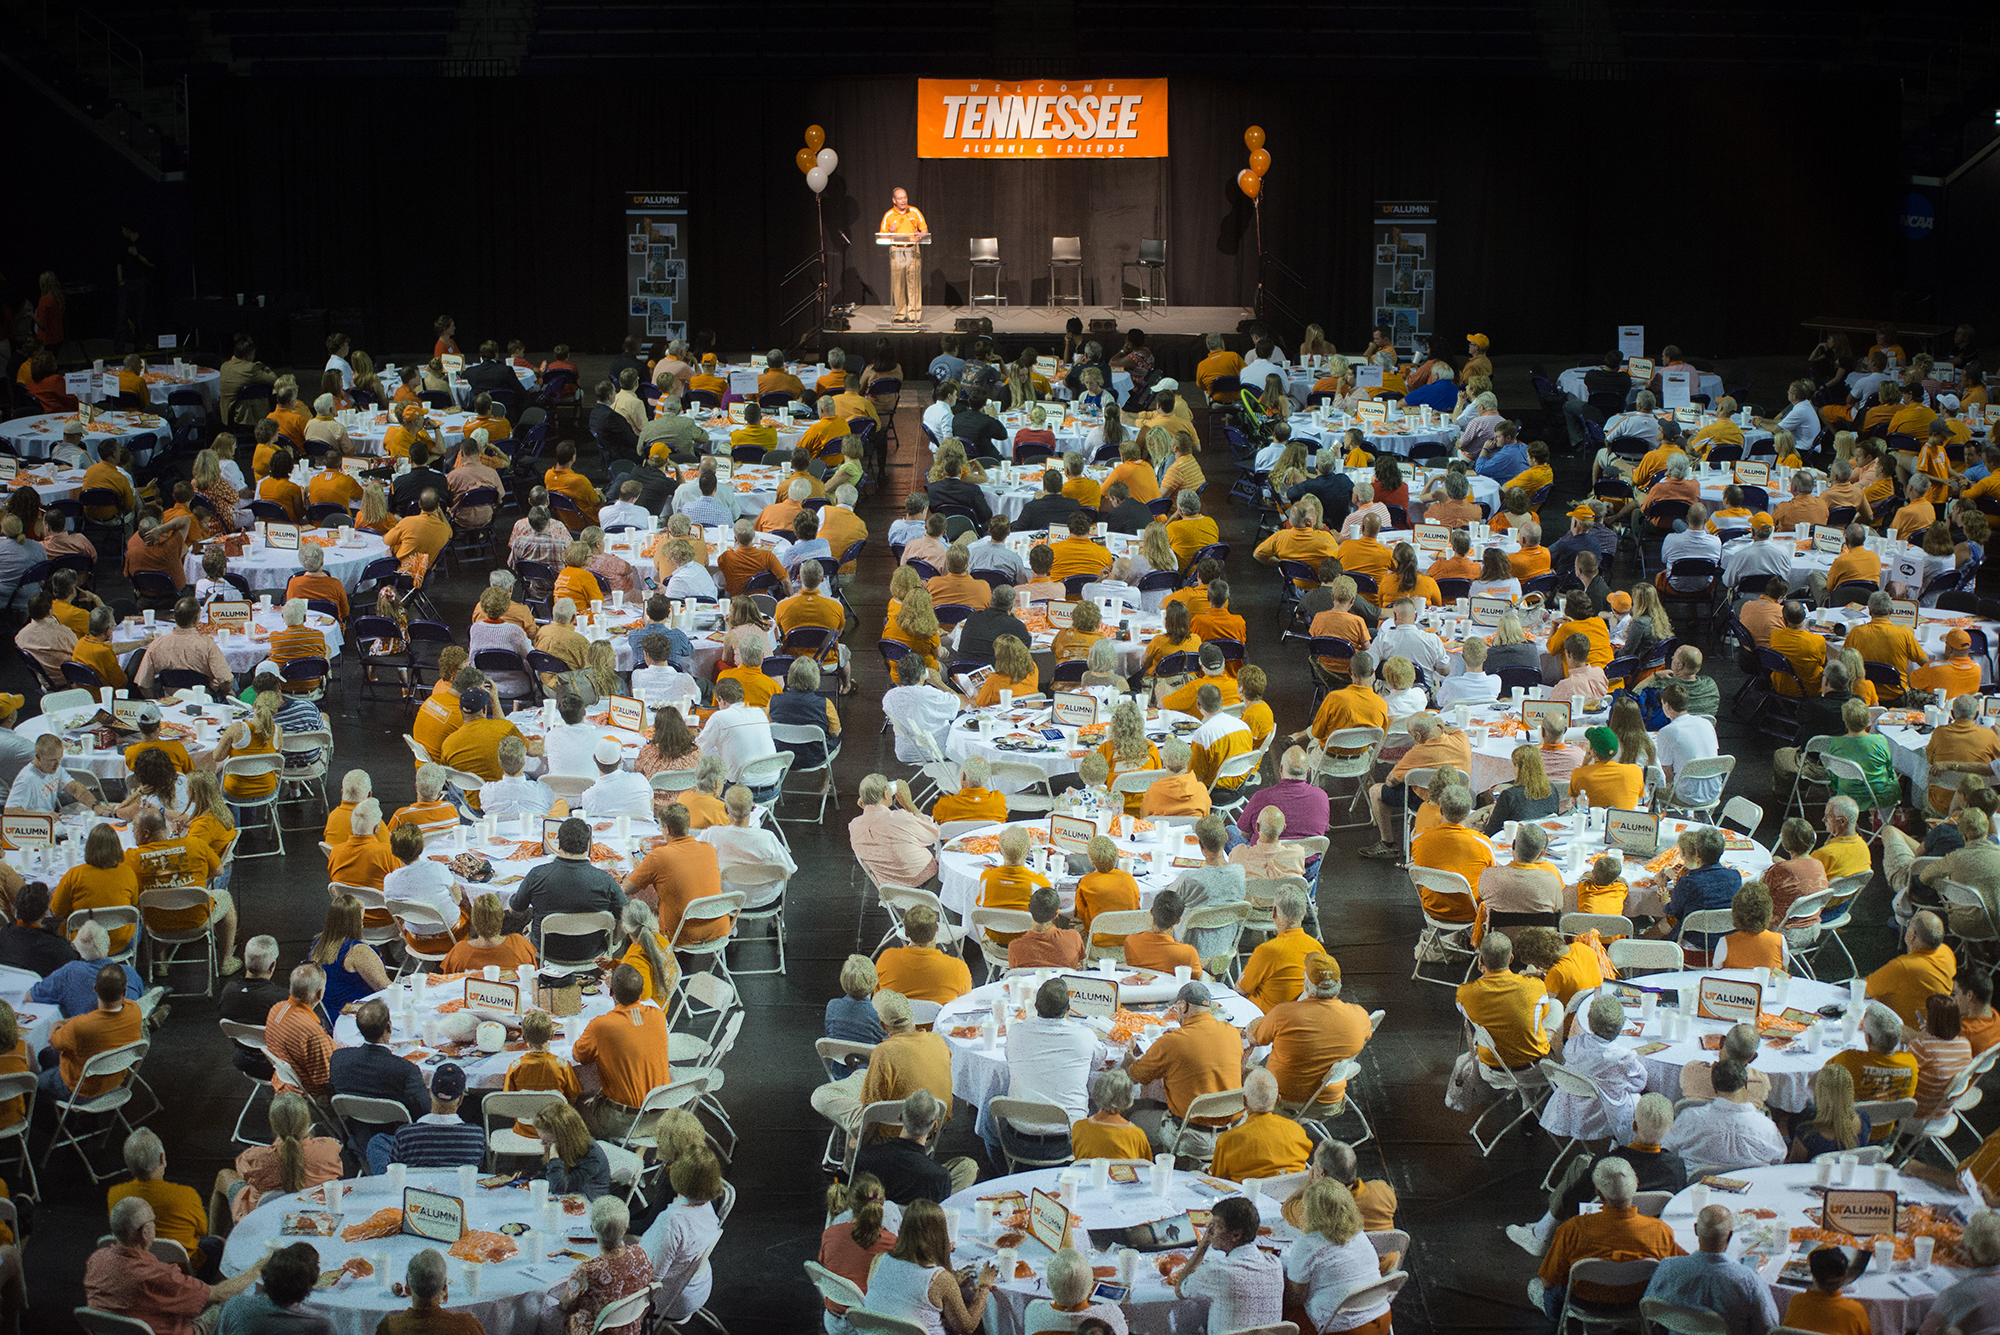 The Nashville Region UT Knoxville Alumni Chapter hosted the 47th annual All Sports Picnic at Lipscomb University